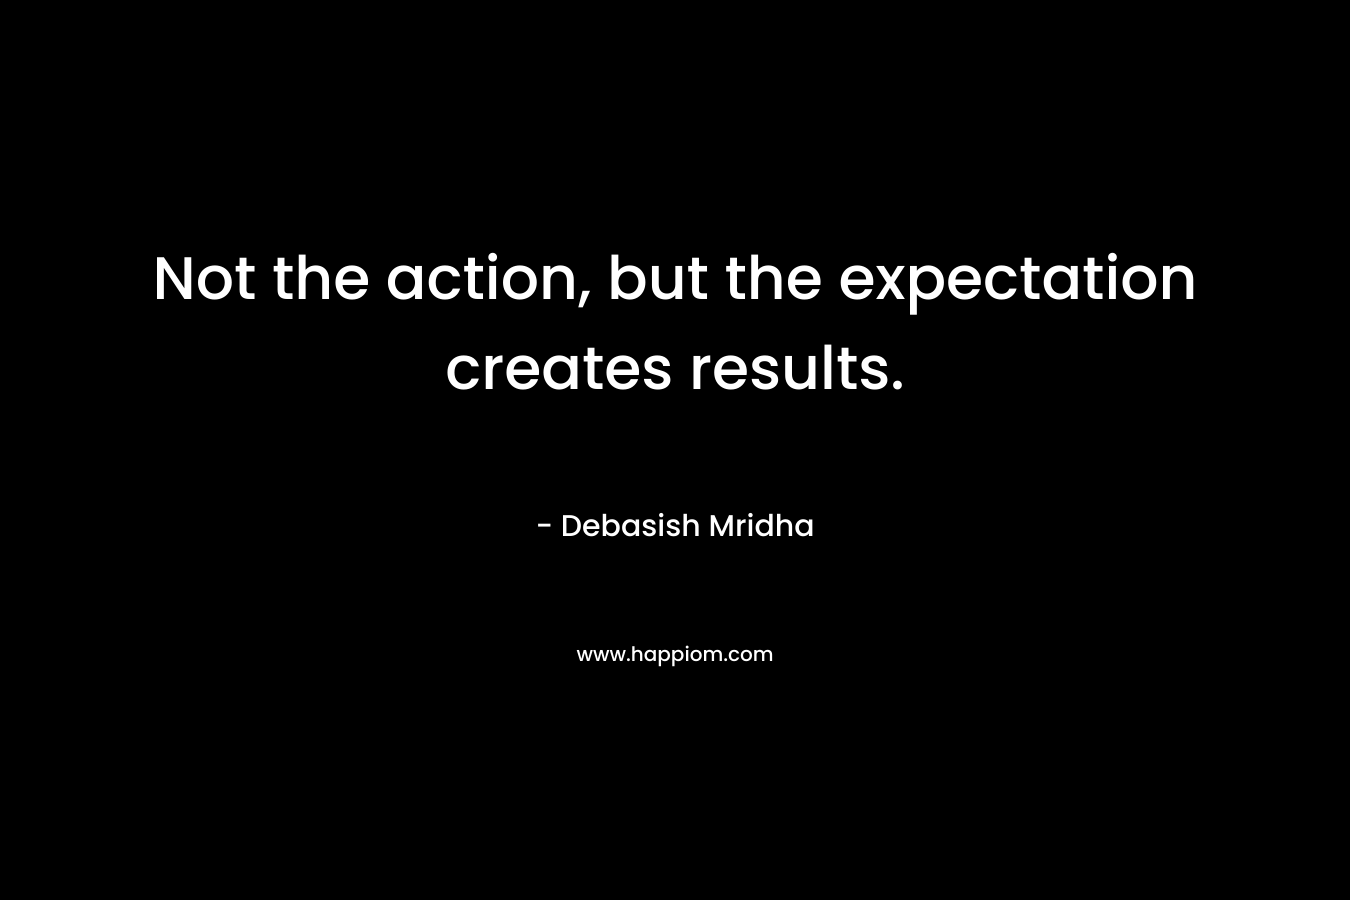 Not the action, but the expectation creates results.